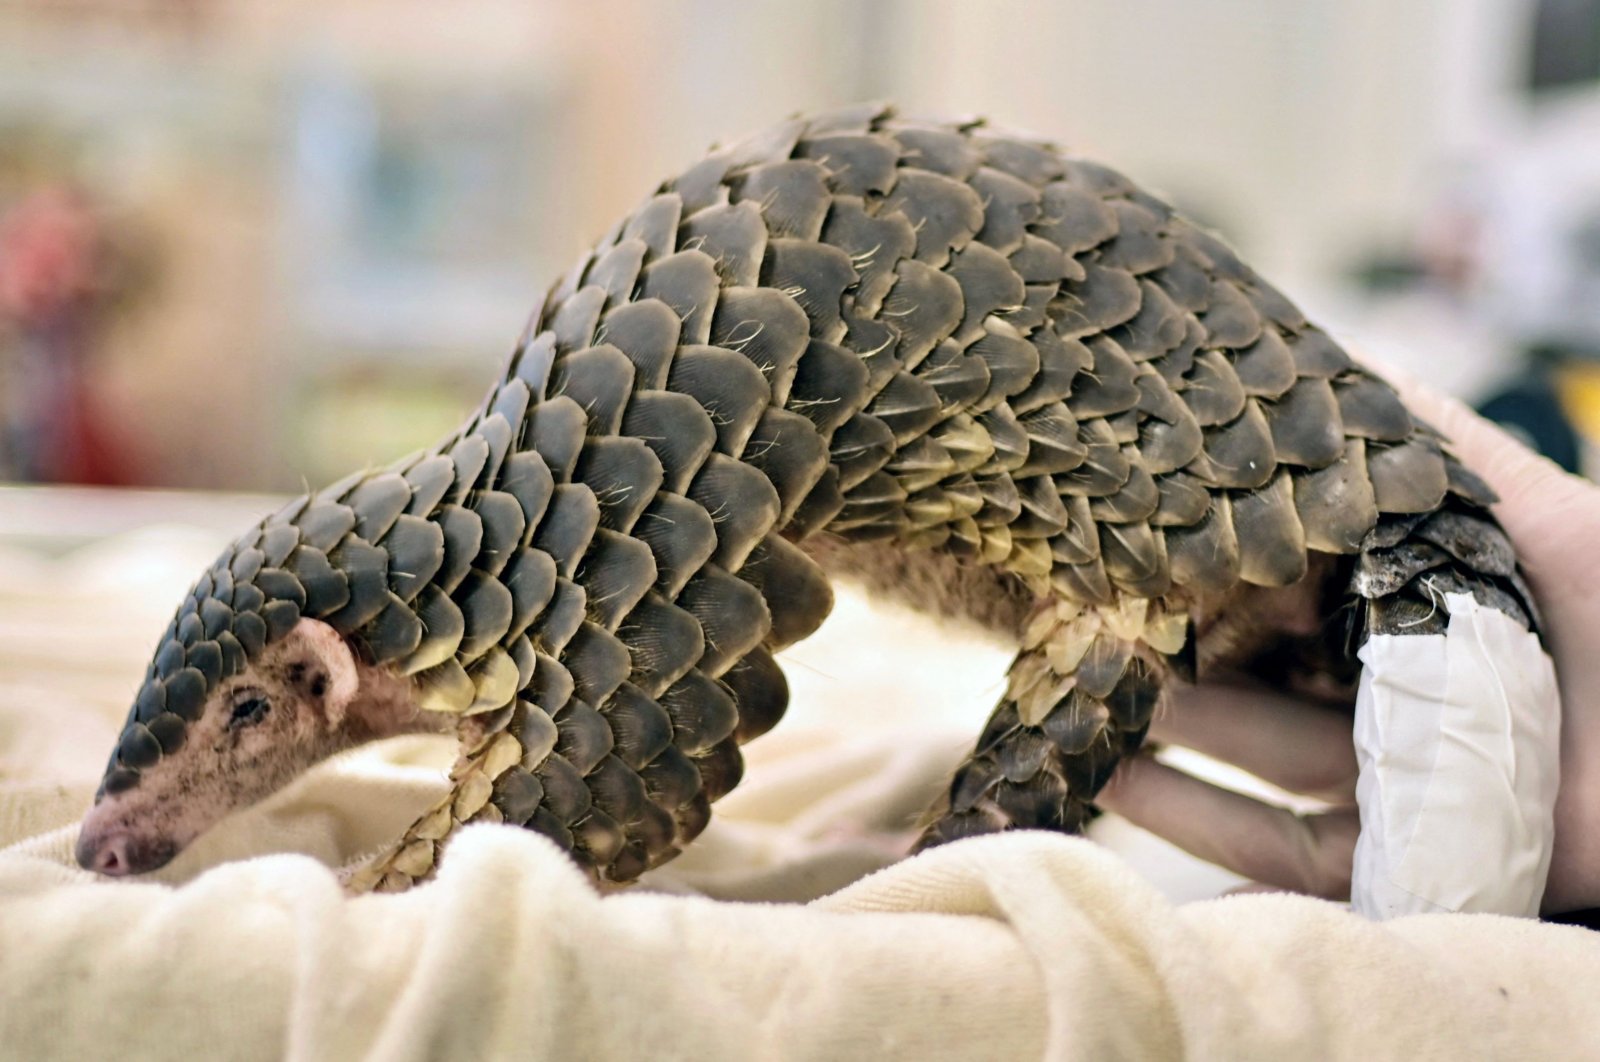 A young pangolin is helped to stand following medical treatment on its tail, believed to have been injured during an attack by dogs, at the Leofoo Village Zoo in Hsinchu, northern Taiwan, Aug. 31, 2022. (AFP Photo)